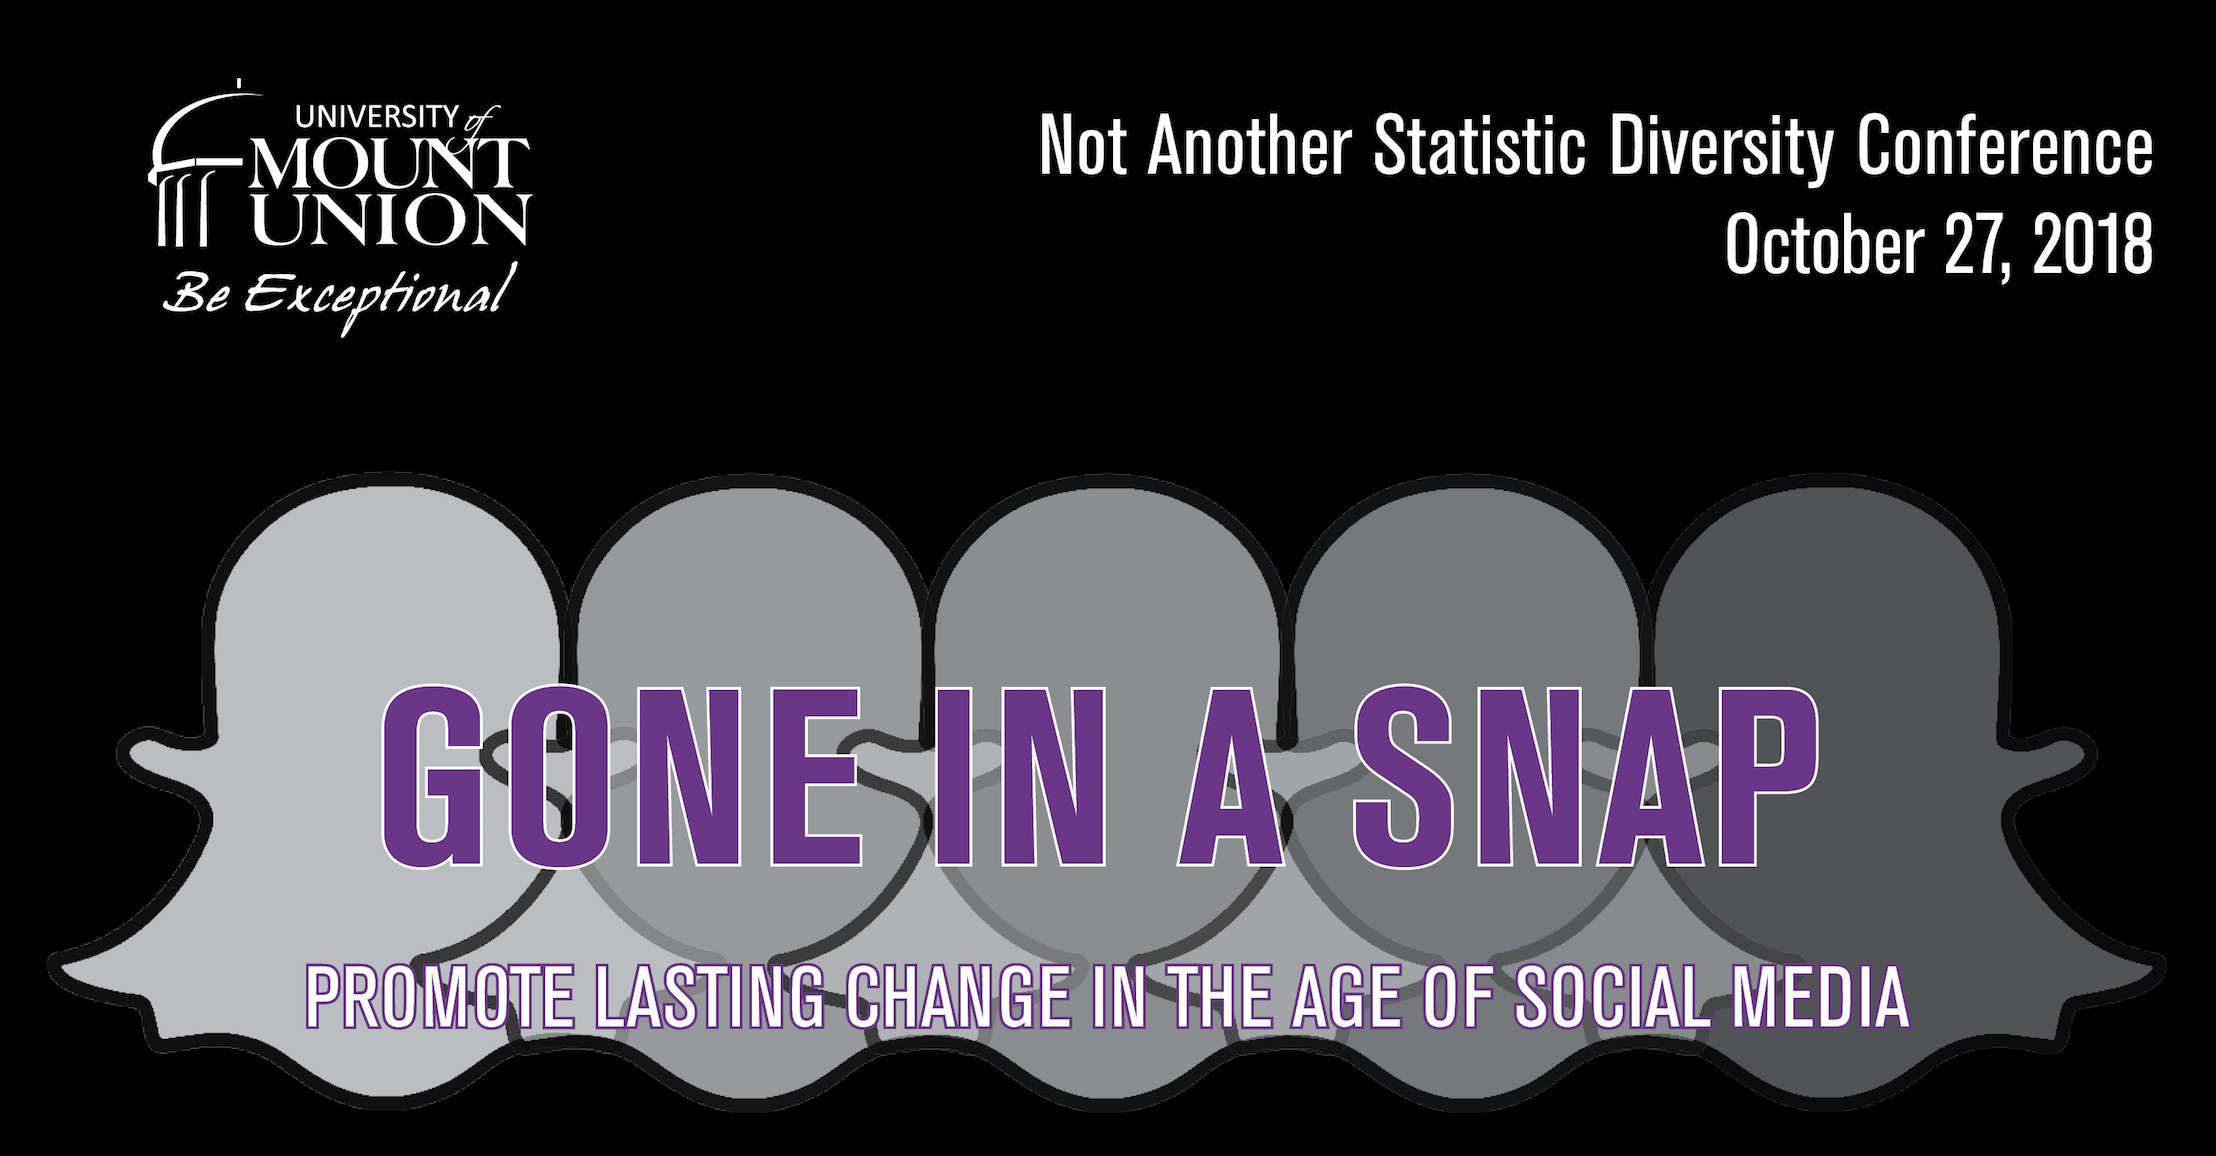 Not Another Statistic Diversity Conference to be held October 27